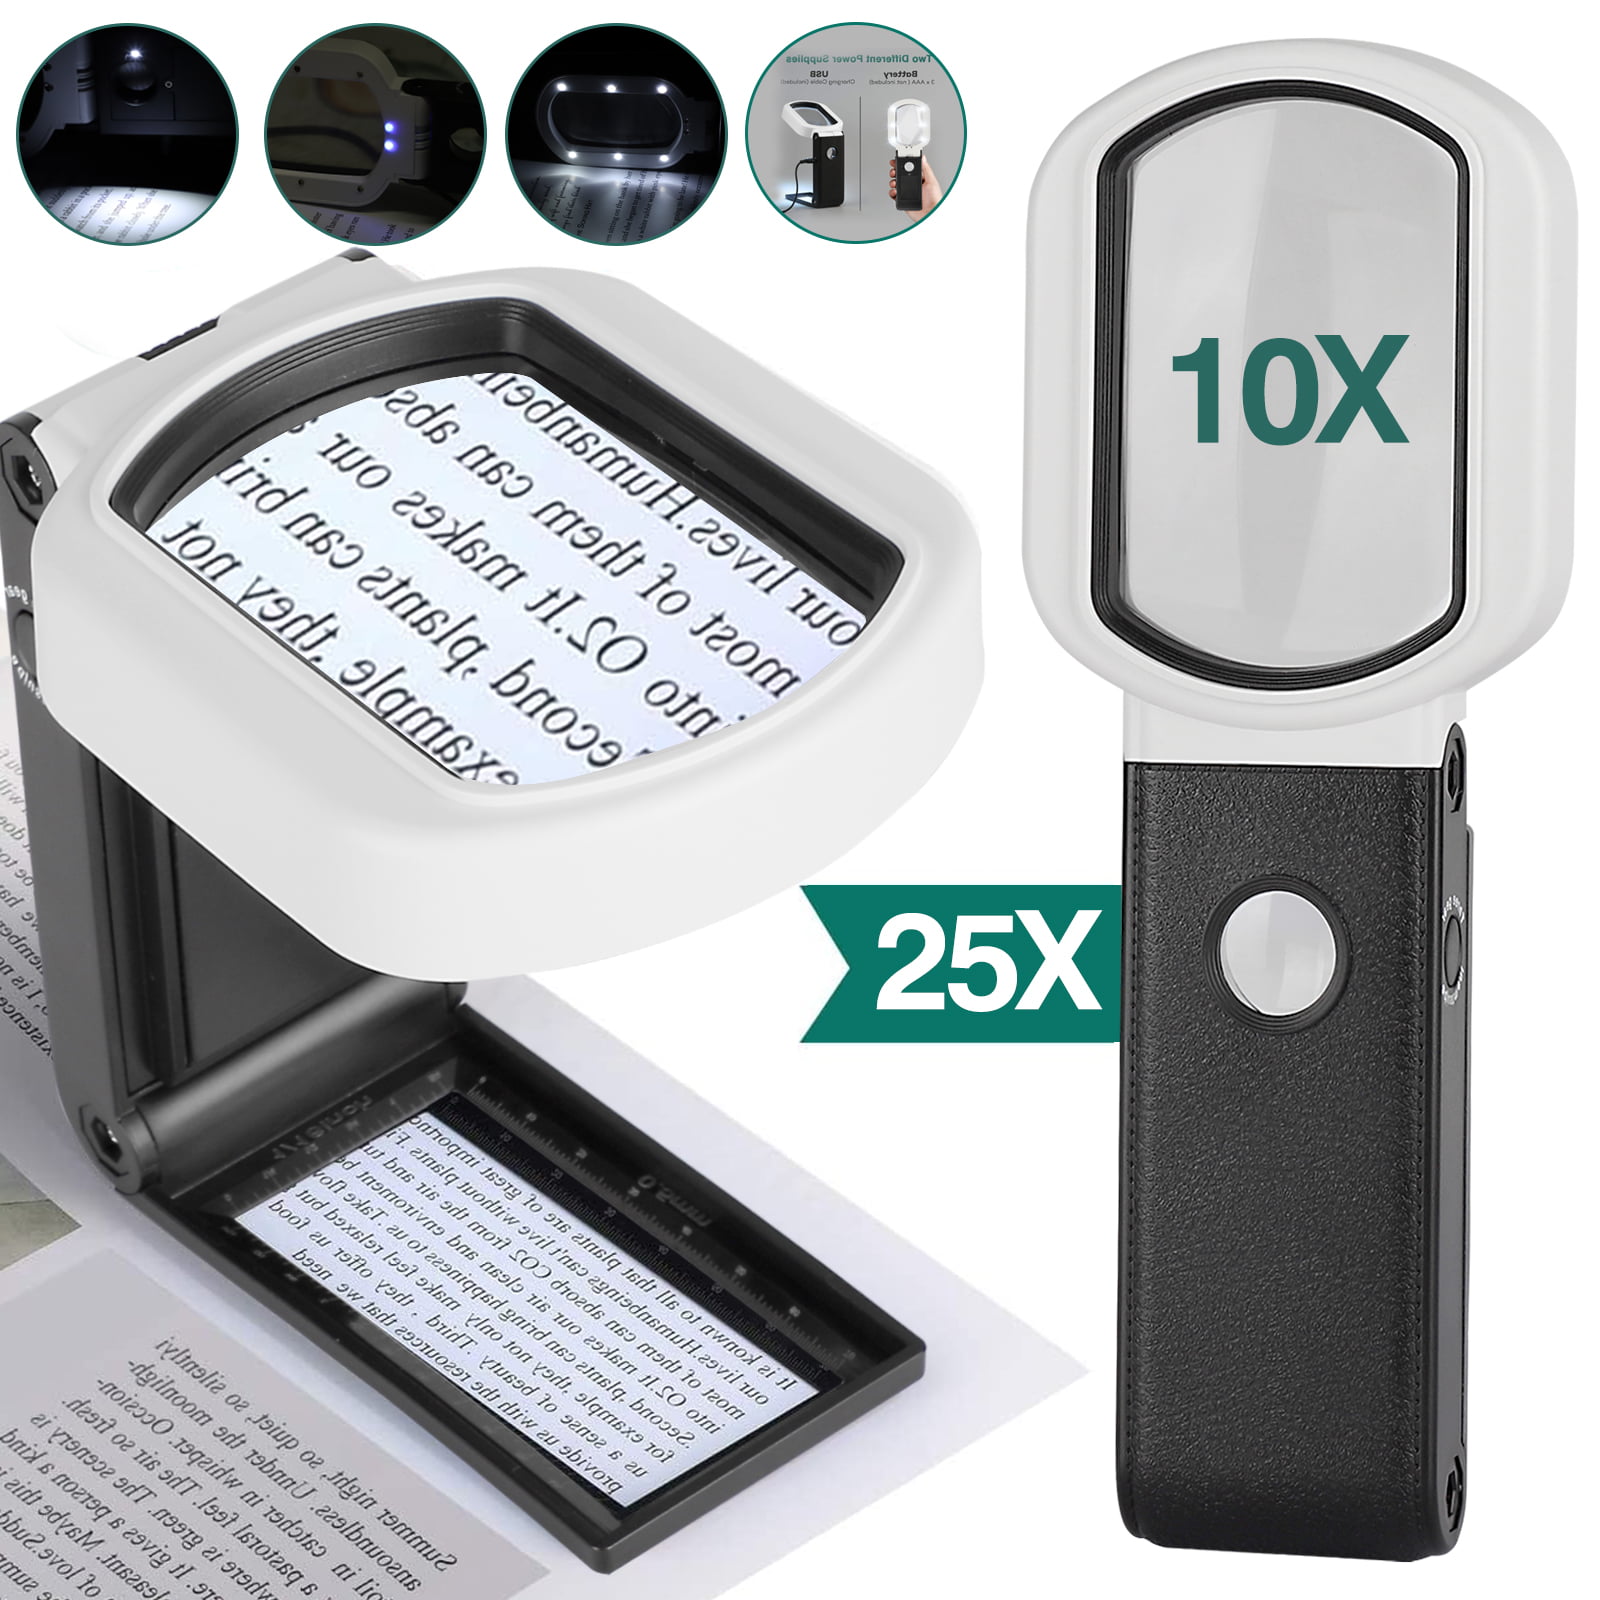 Jewellery Work Coin Examining & more Reading Magnifying Glass for Books Newspaper Magnifier Glass Handheld Magnifier with 6 x and 2 x Lens LED Rectangle Magnifying Glass with light by Kovira 